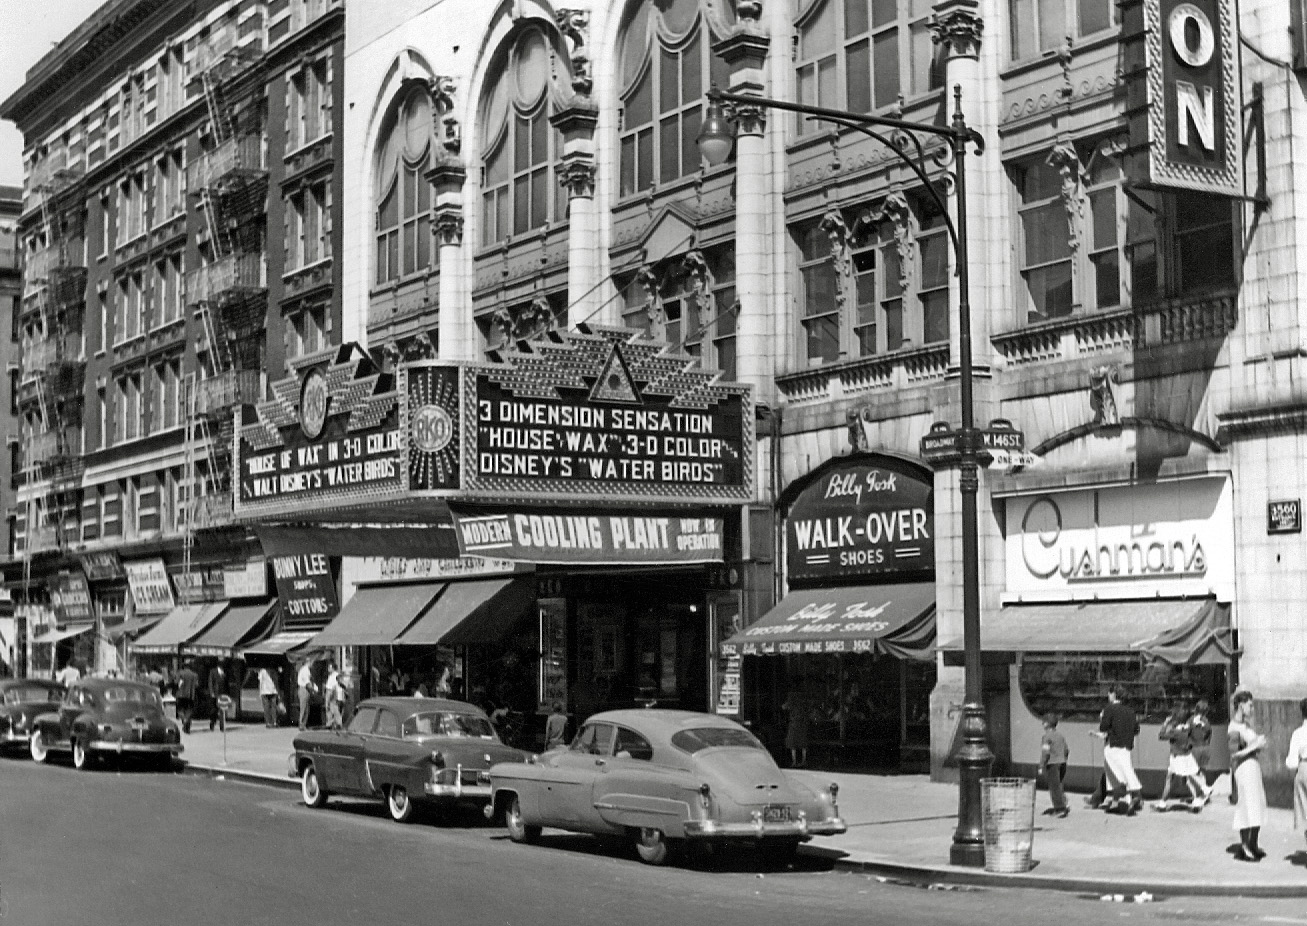 RKO Theatre, Broadway and West 146th Street in New York City taken June 3, 1953 by Peter Jingeleski. View full size.